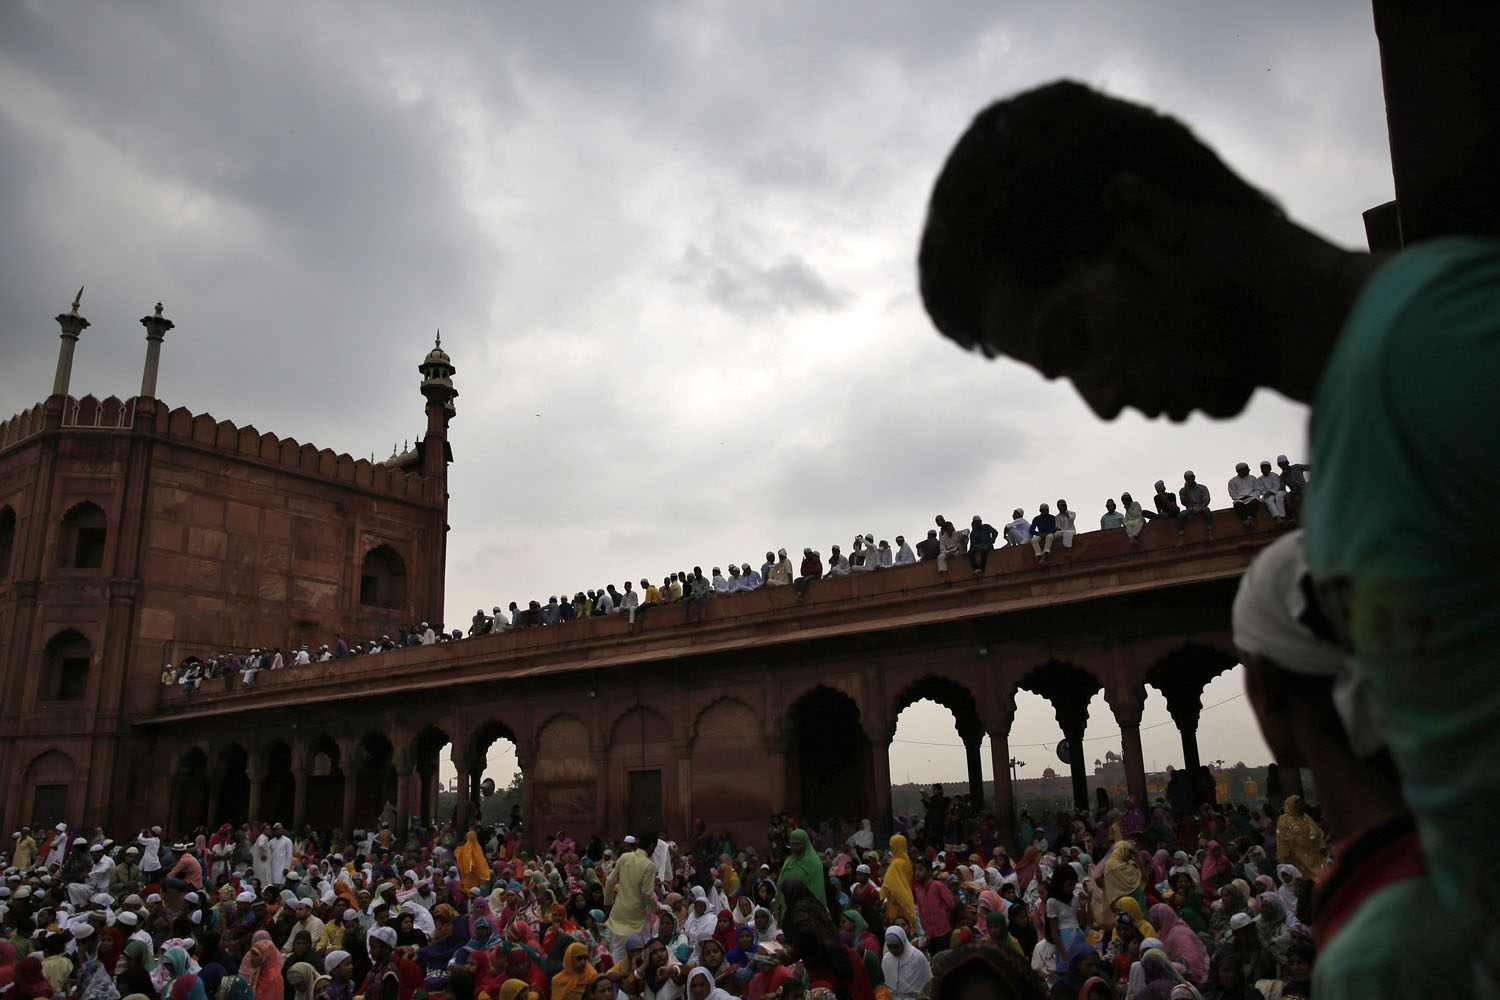 Muslims sit inside the compound of Jama Masjid (Grand Mosque) before the start of last Friday prayers of the holy fasting month of Ramadan in the old quarters of Delhi